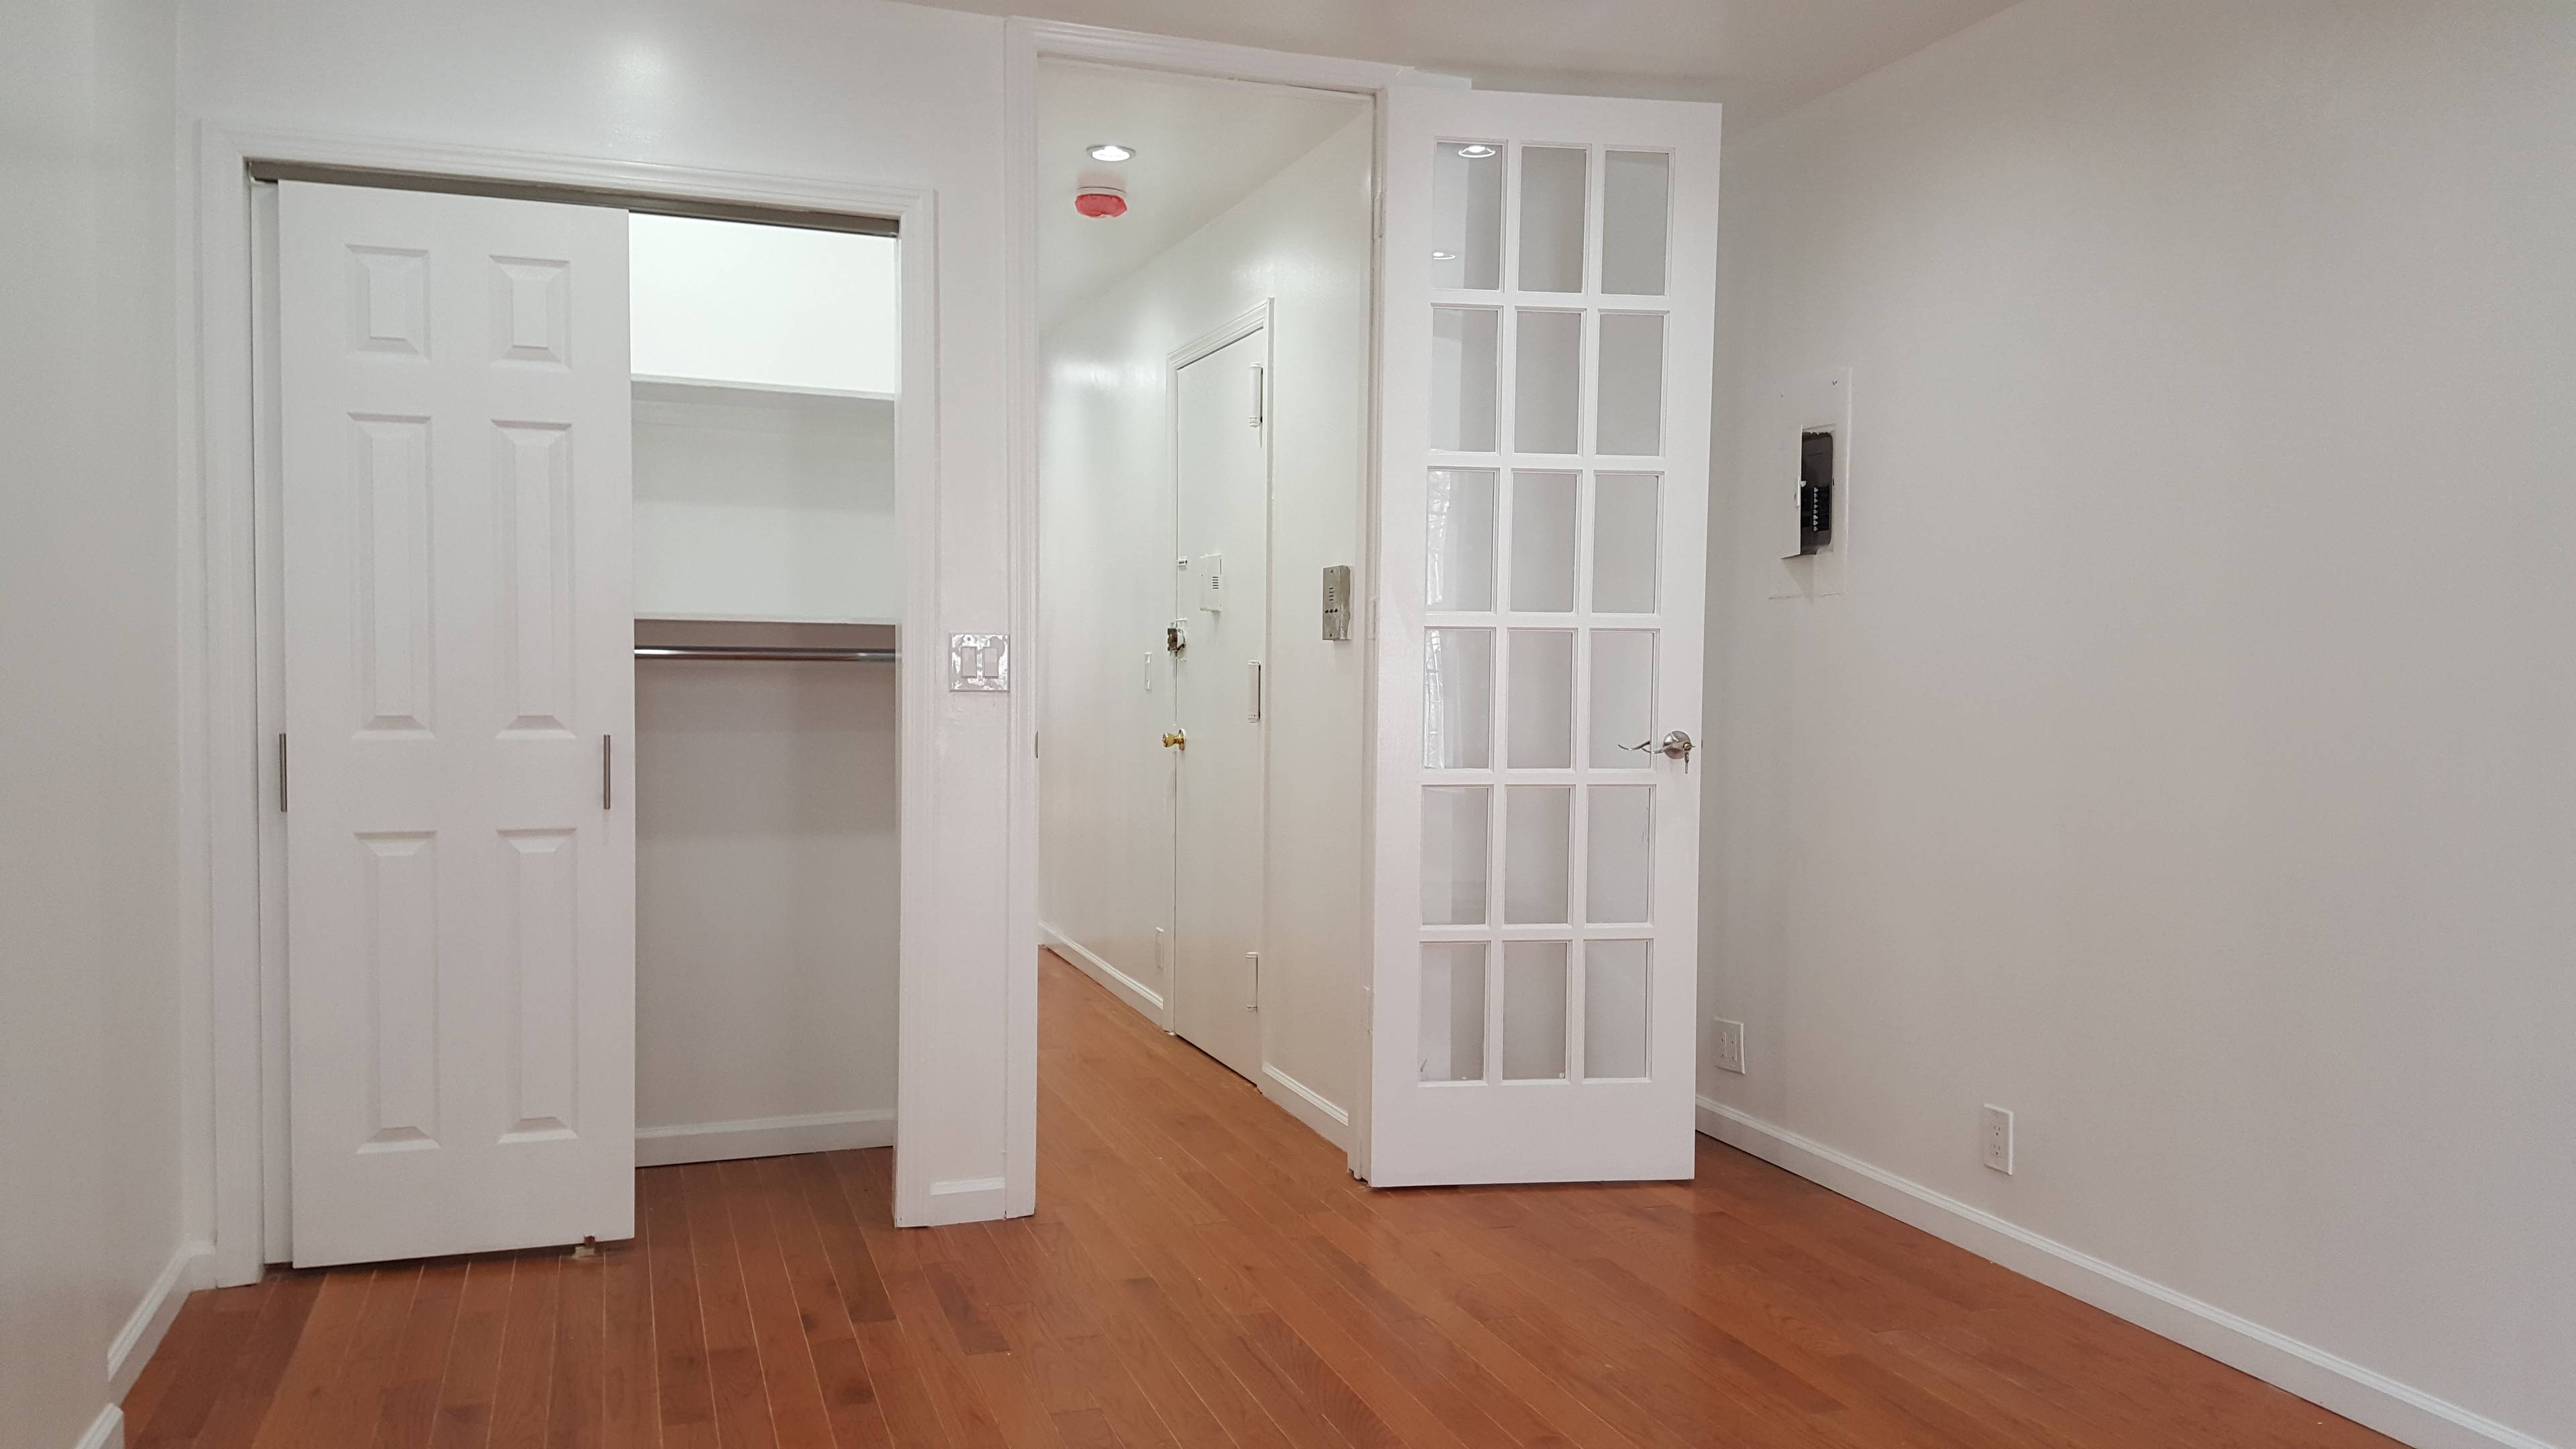 HUGE, NEWLY RENOVATED 2BR WITH A GORGEOUS EAT IN KITCHEN!